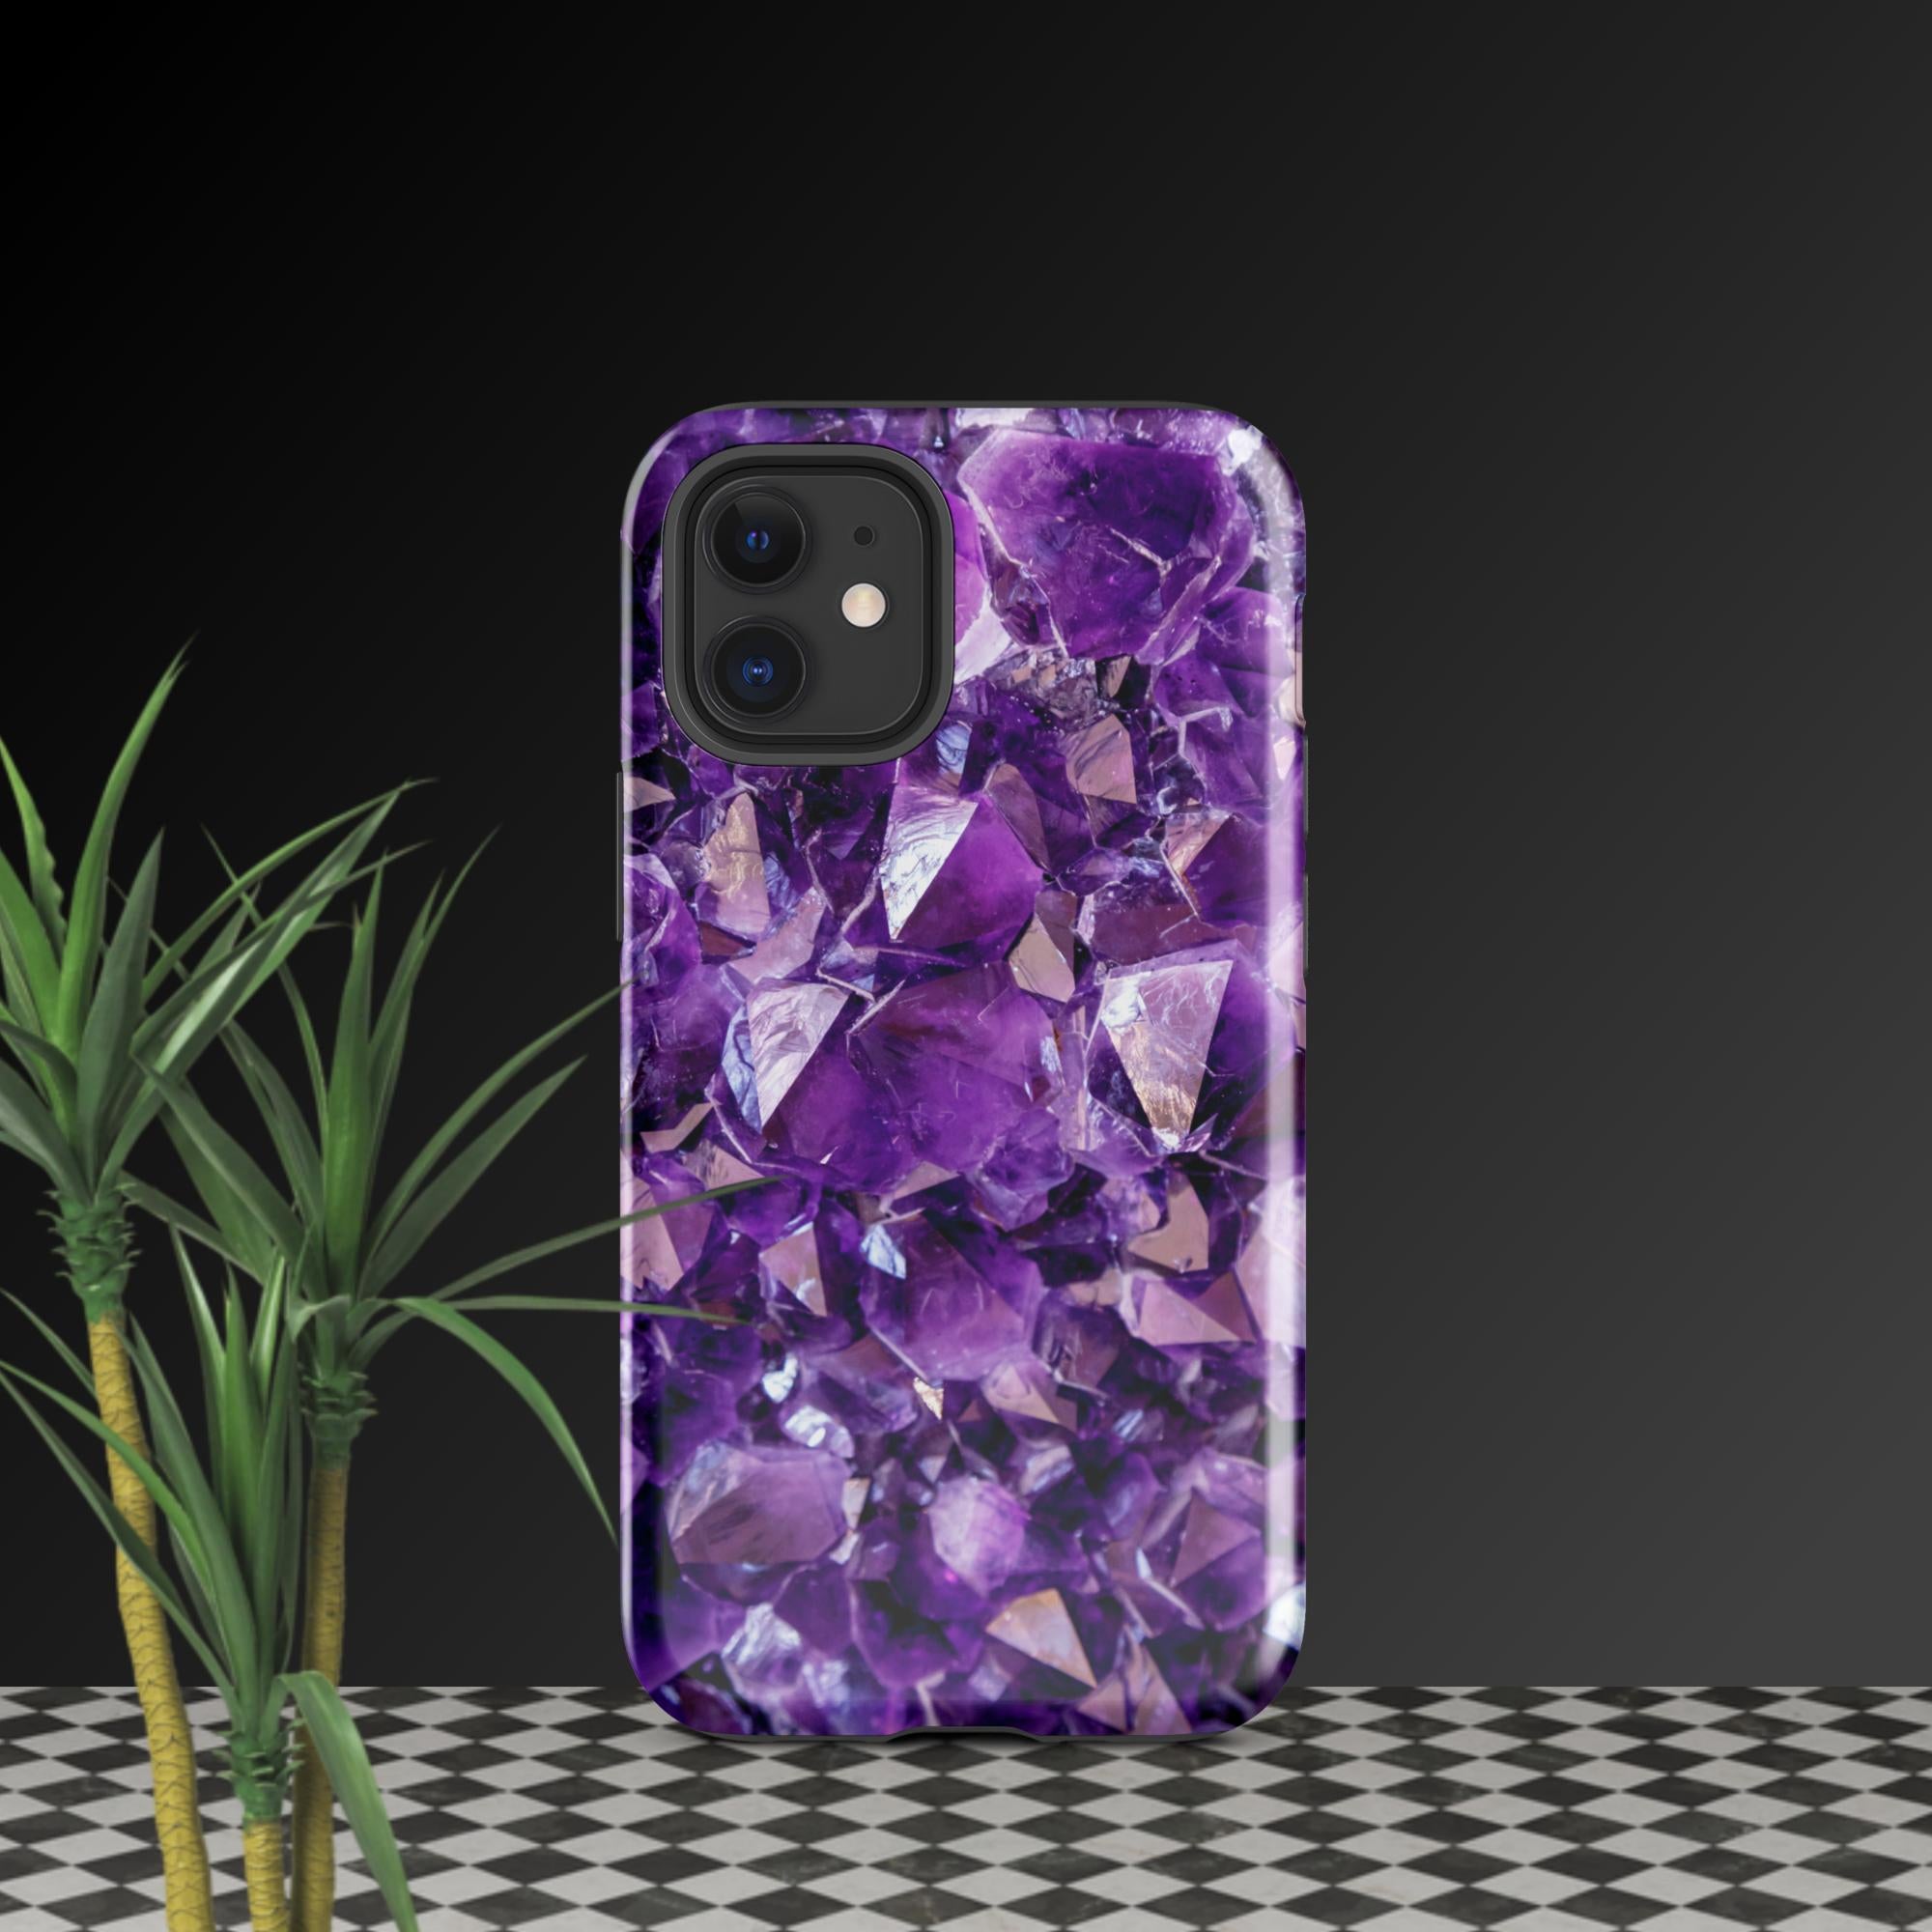 purple amethyst crystal geode phone case by clarity cove iphone 12 mini